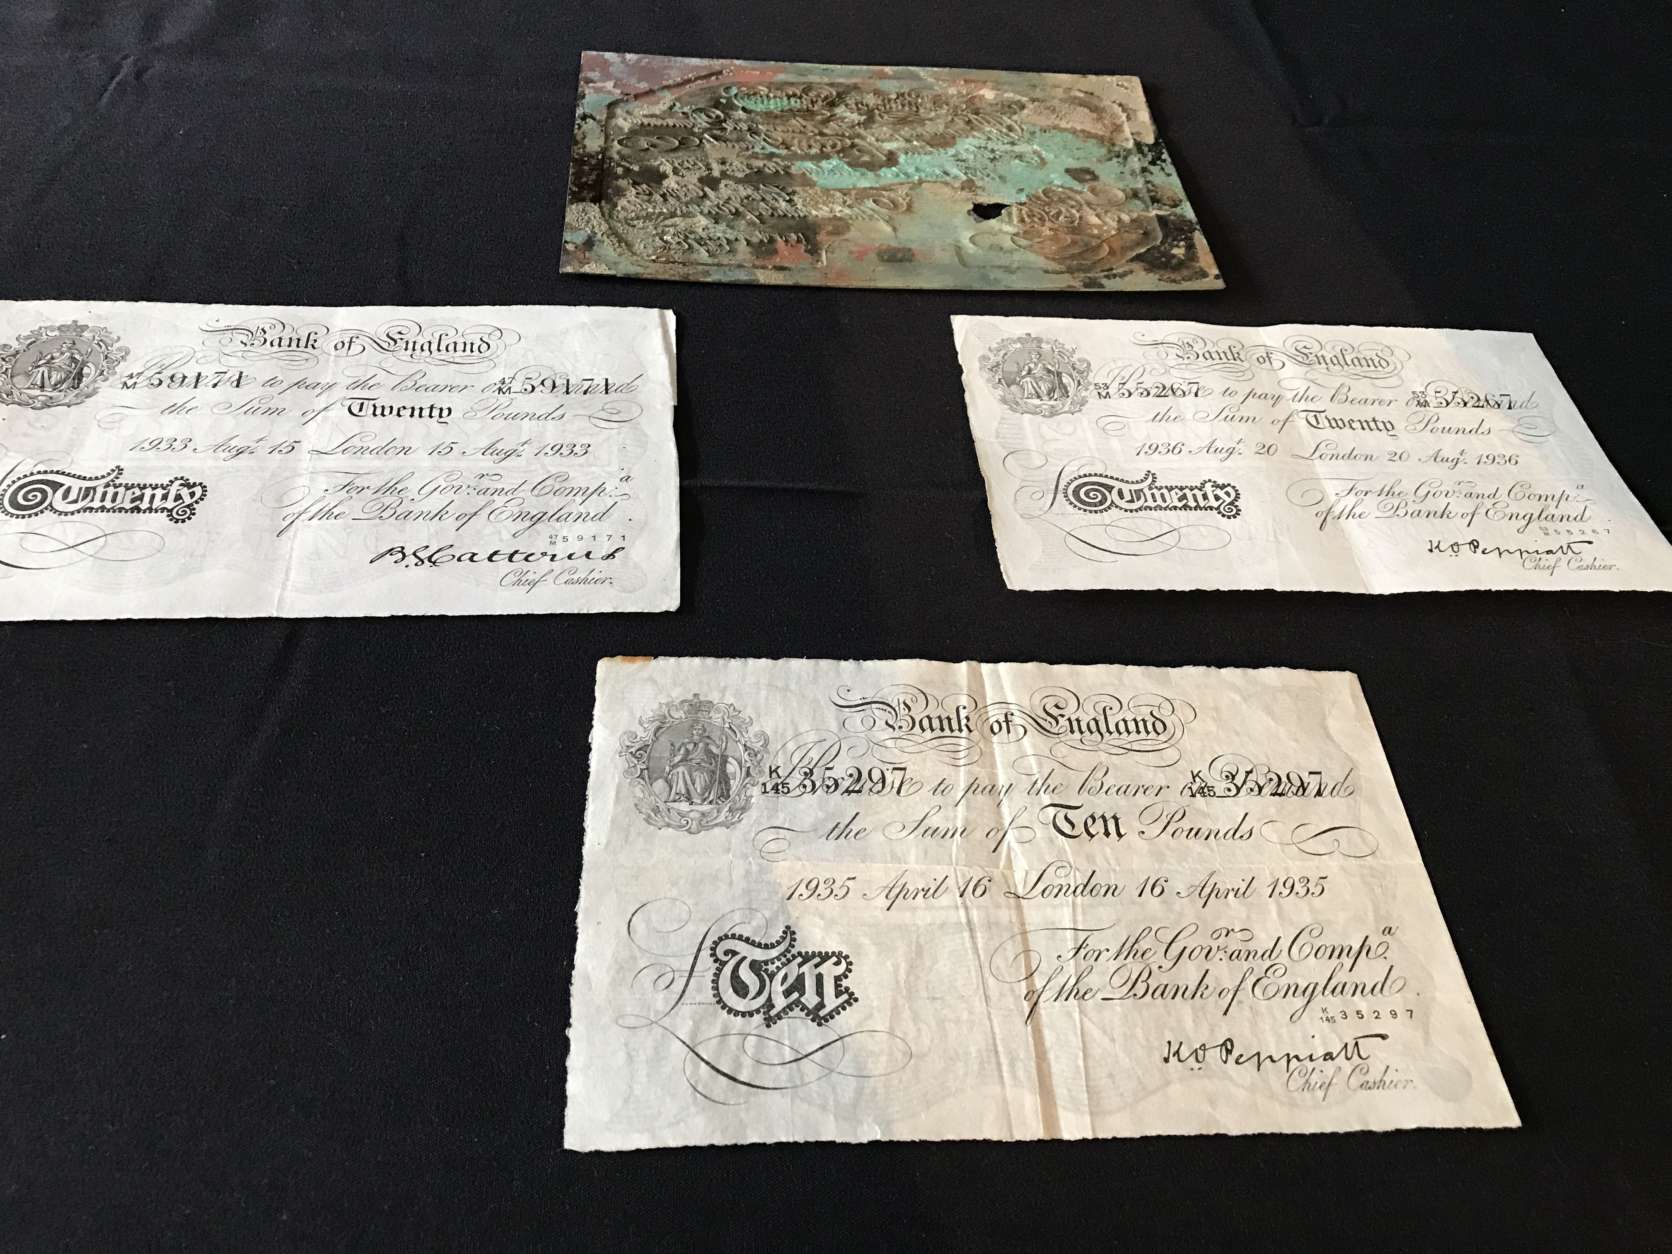 Forged British currency plates and notes, created by master Jewish forgers in concentration camps, were part of a German effort not only to fund intelligence activity, but also to destroy the British currency. The Nazis had told their prisoners that they would spare the prisoners' lives if they created the forgeries. (WTOP/Ginger Whitaker)